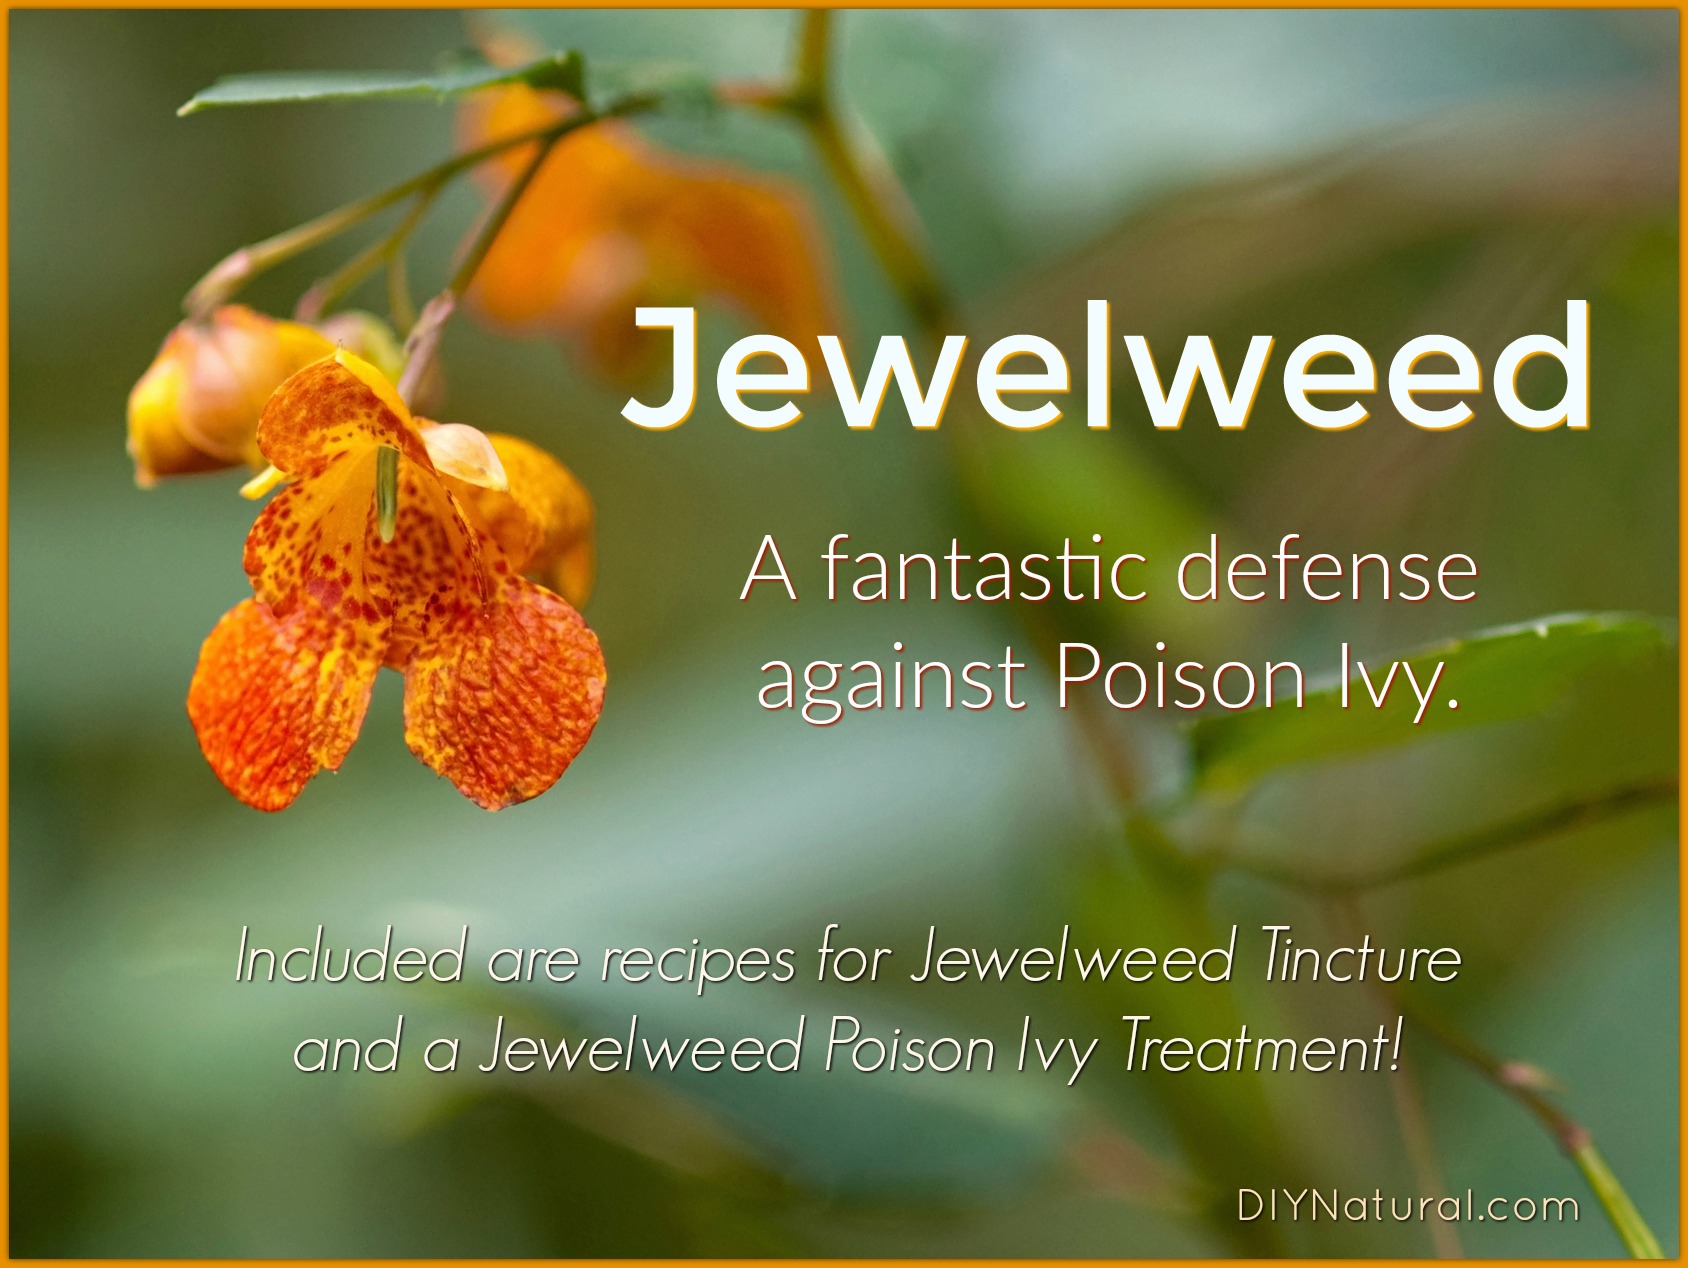 Image of A jewelweed plant being used to treat a poison ivy rash